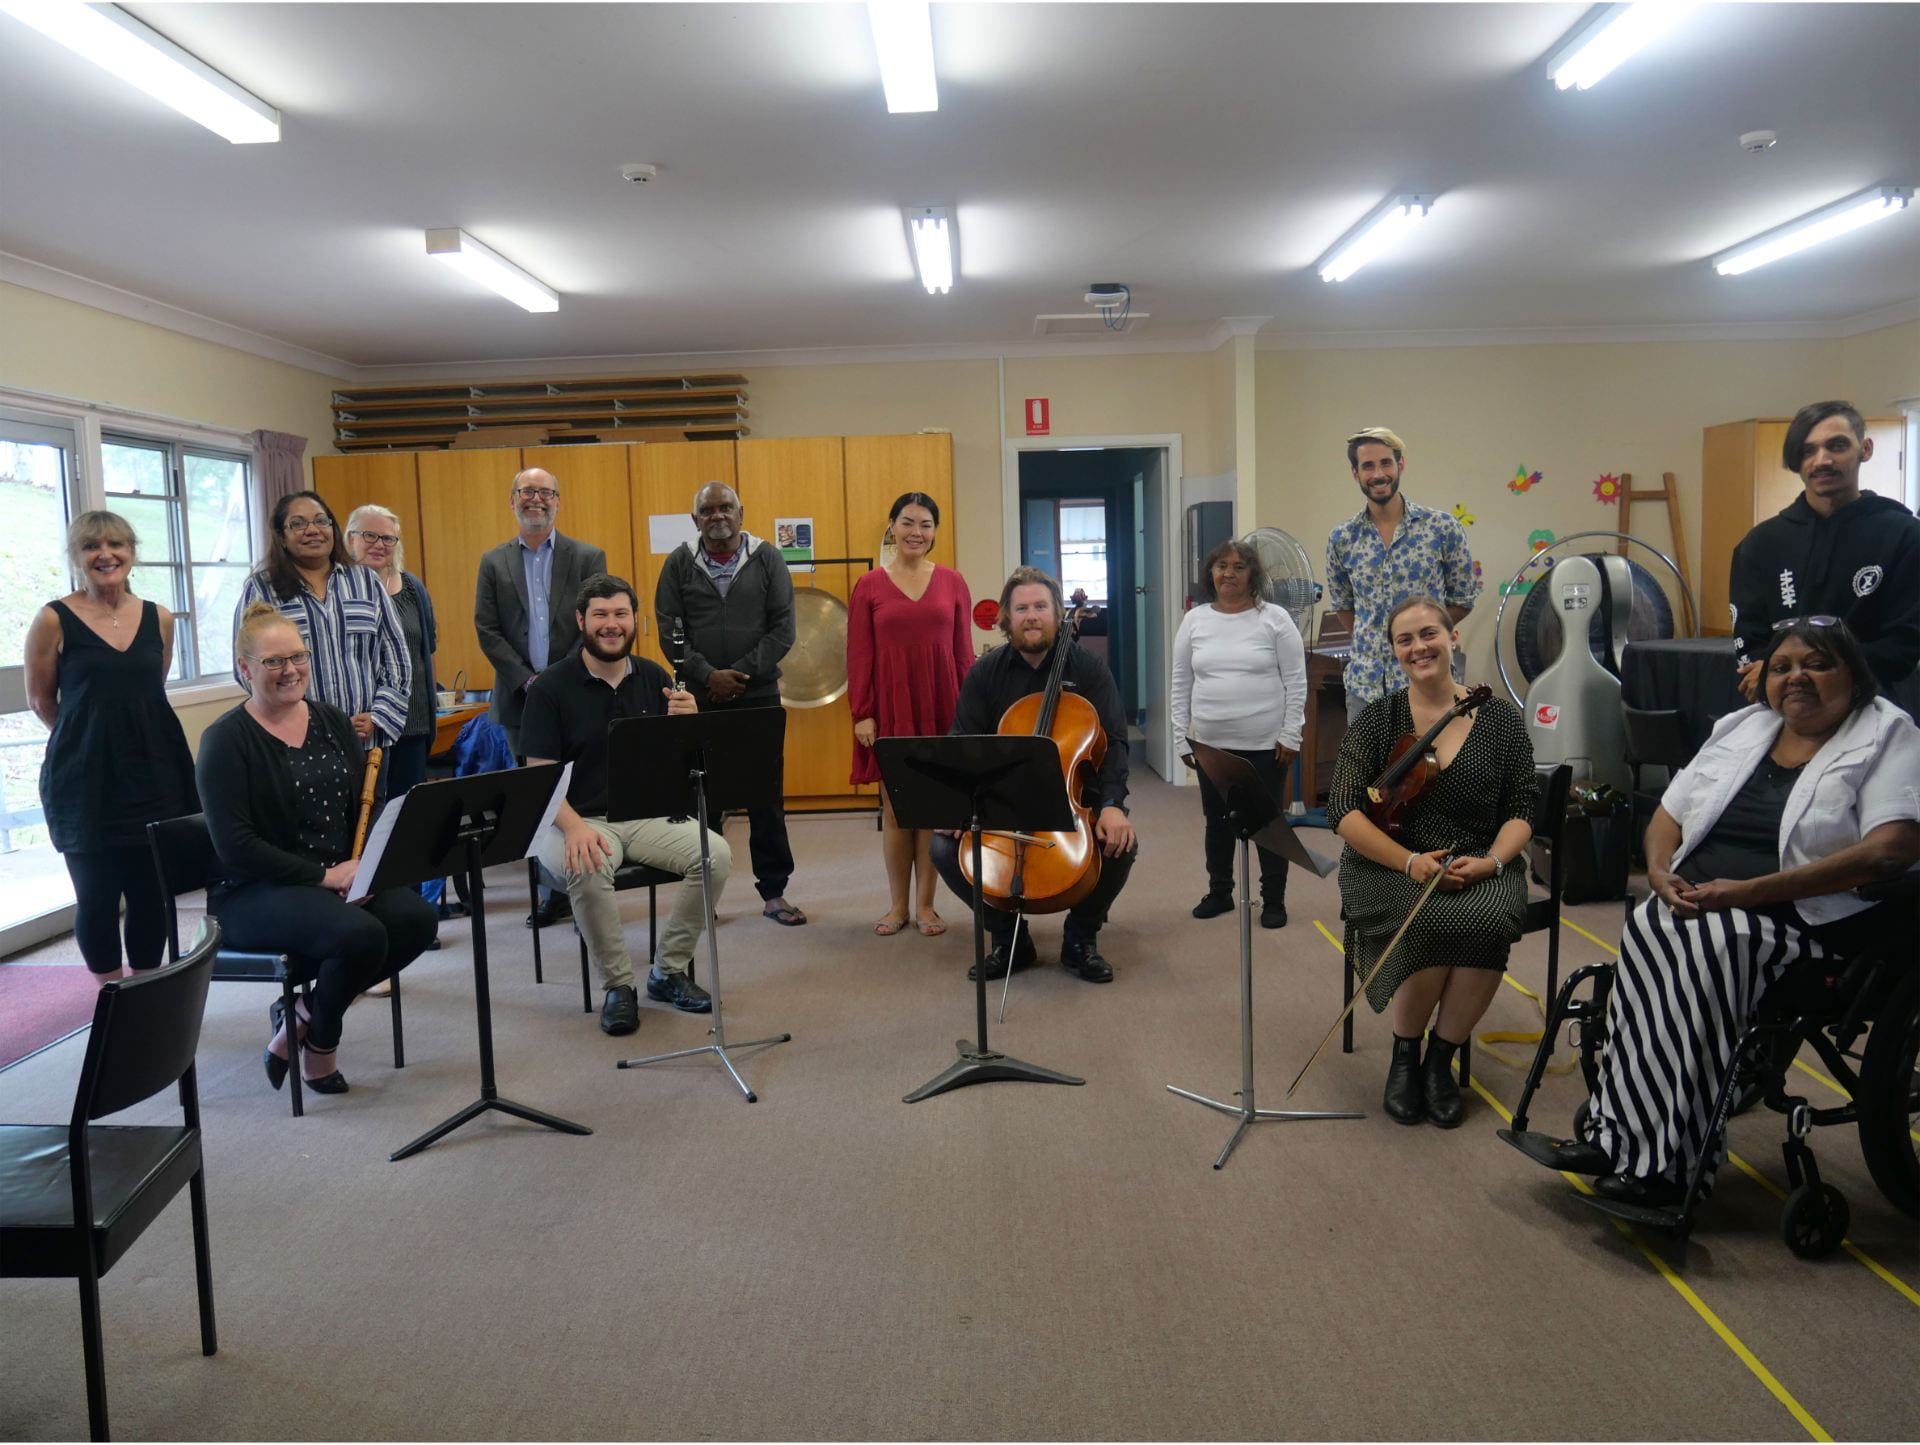 A group of individuals including the composition band, various members of UNE staff and Elder's from the local community stand together